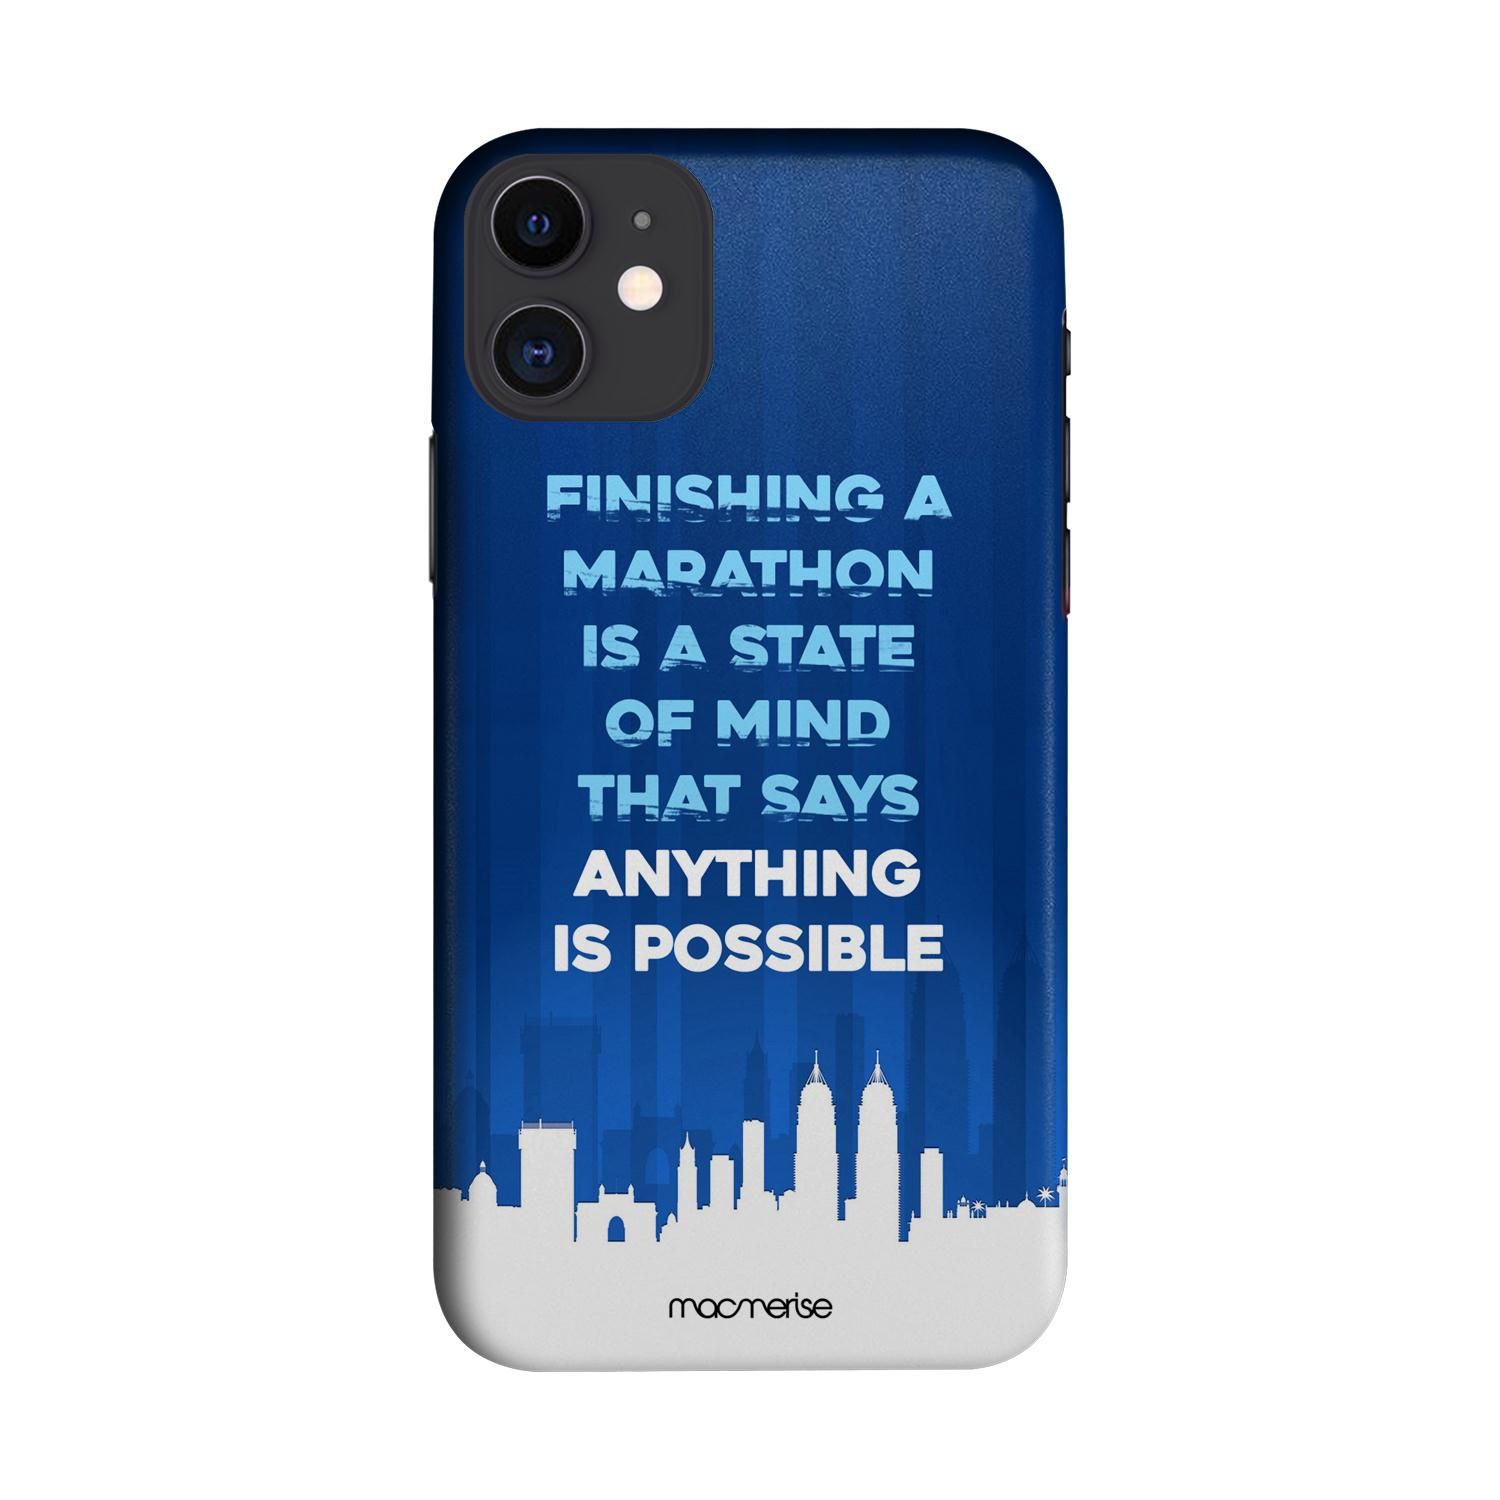 Buy Anything Is Possible - Sleek Phone Case for iPhone 11 Online